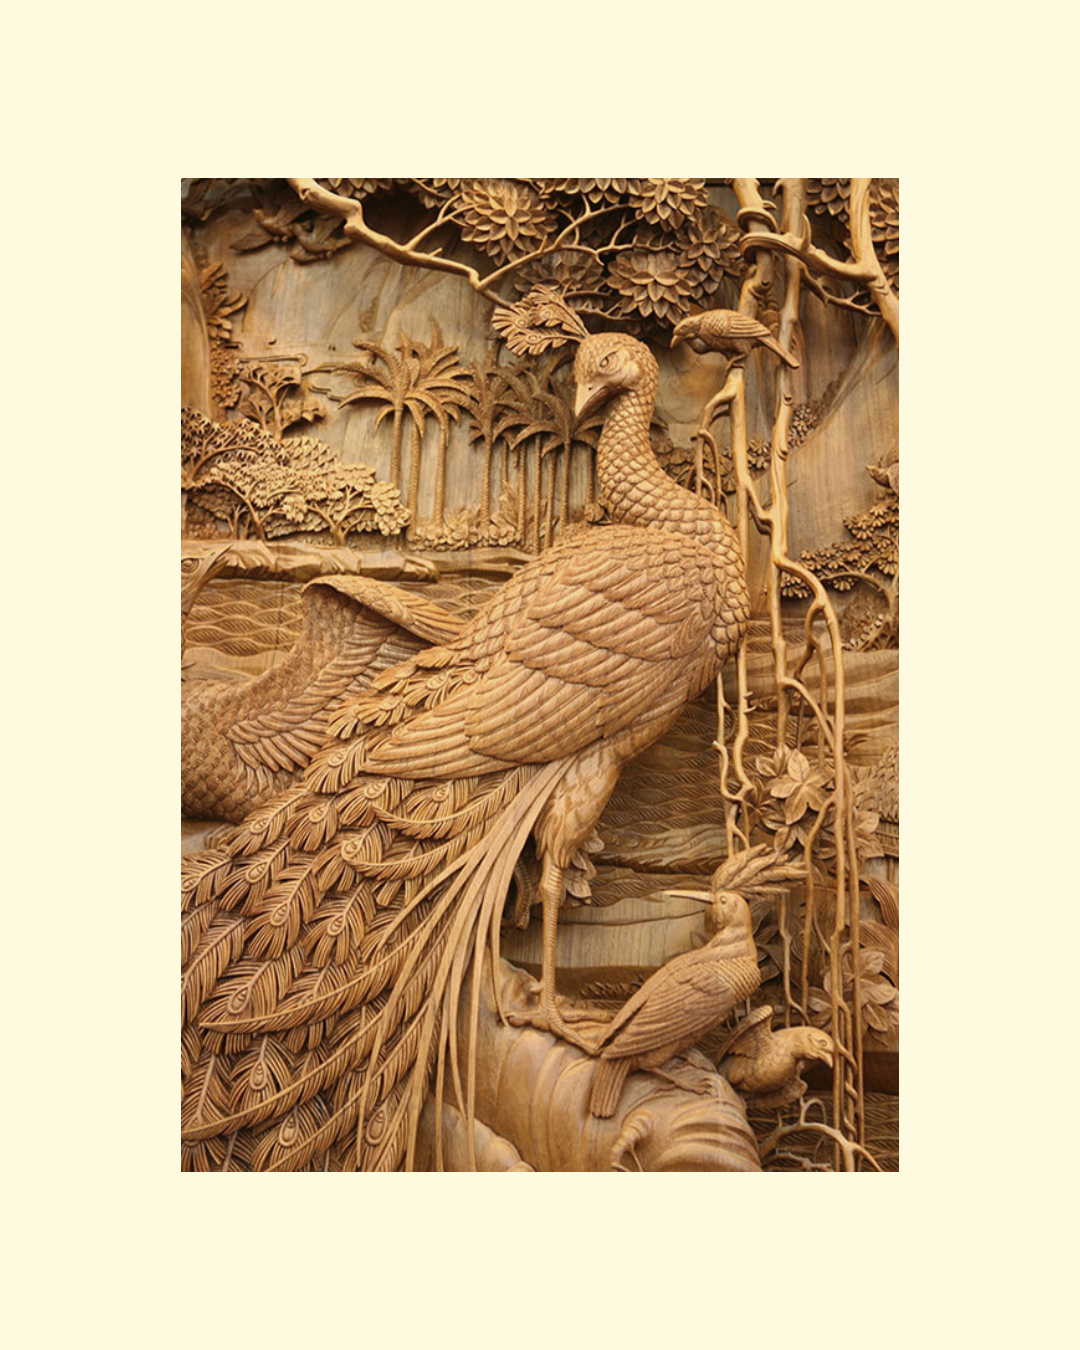 Intricate Wood Carving Techniques From Around The World